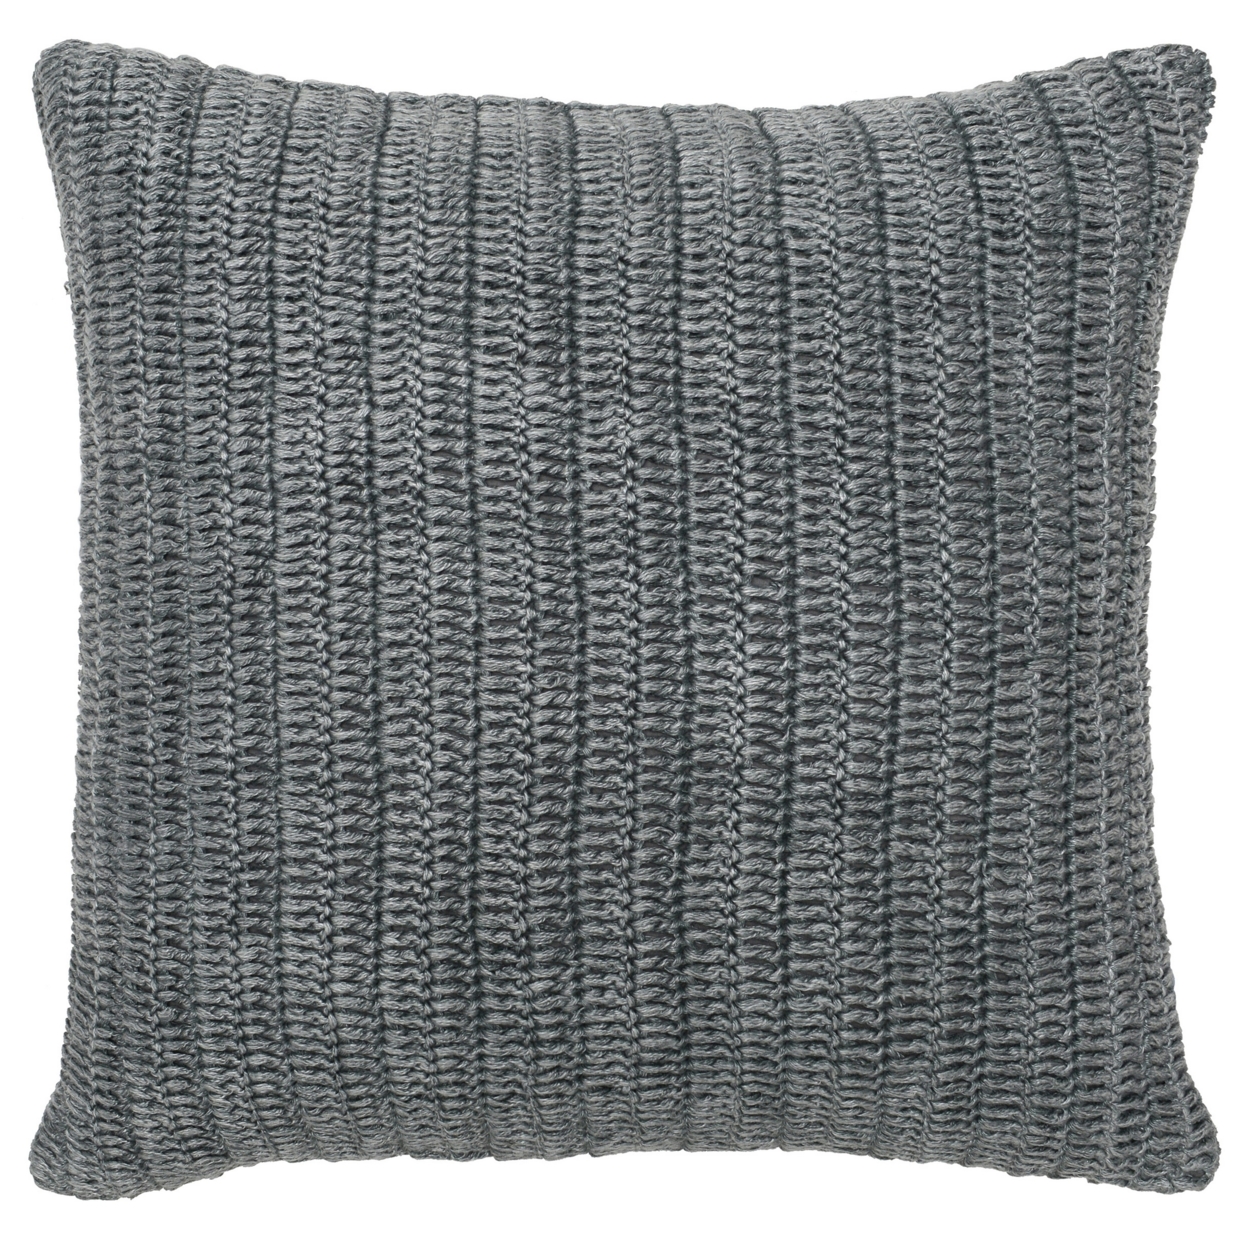 Square Fabric Throw Pillow With Hand Knit Details And Knife Edges, Gray- Saltoro Sherpi